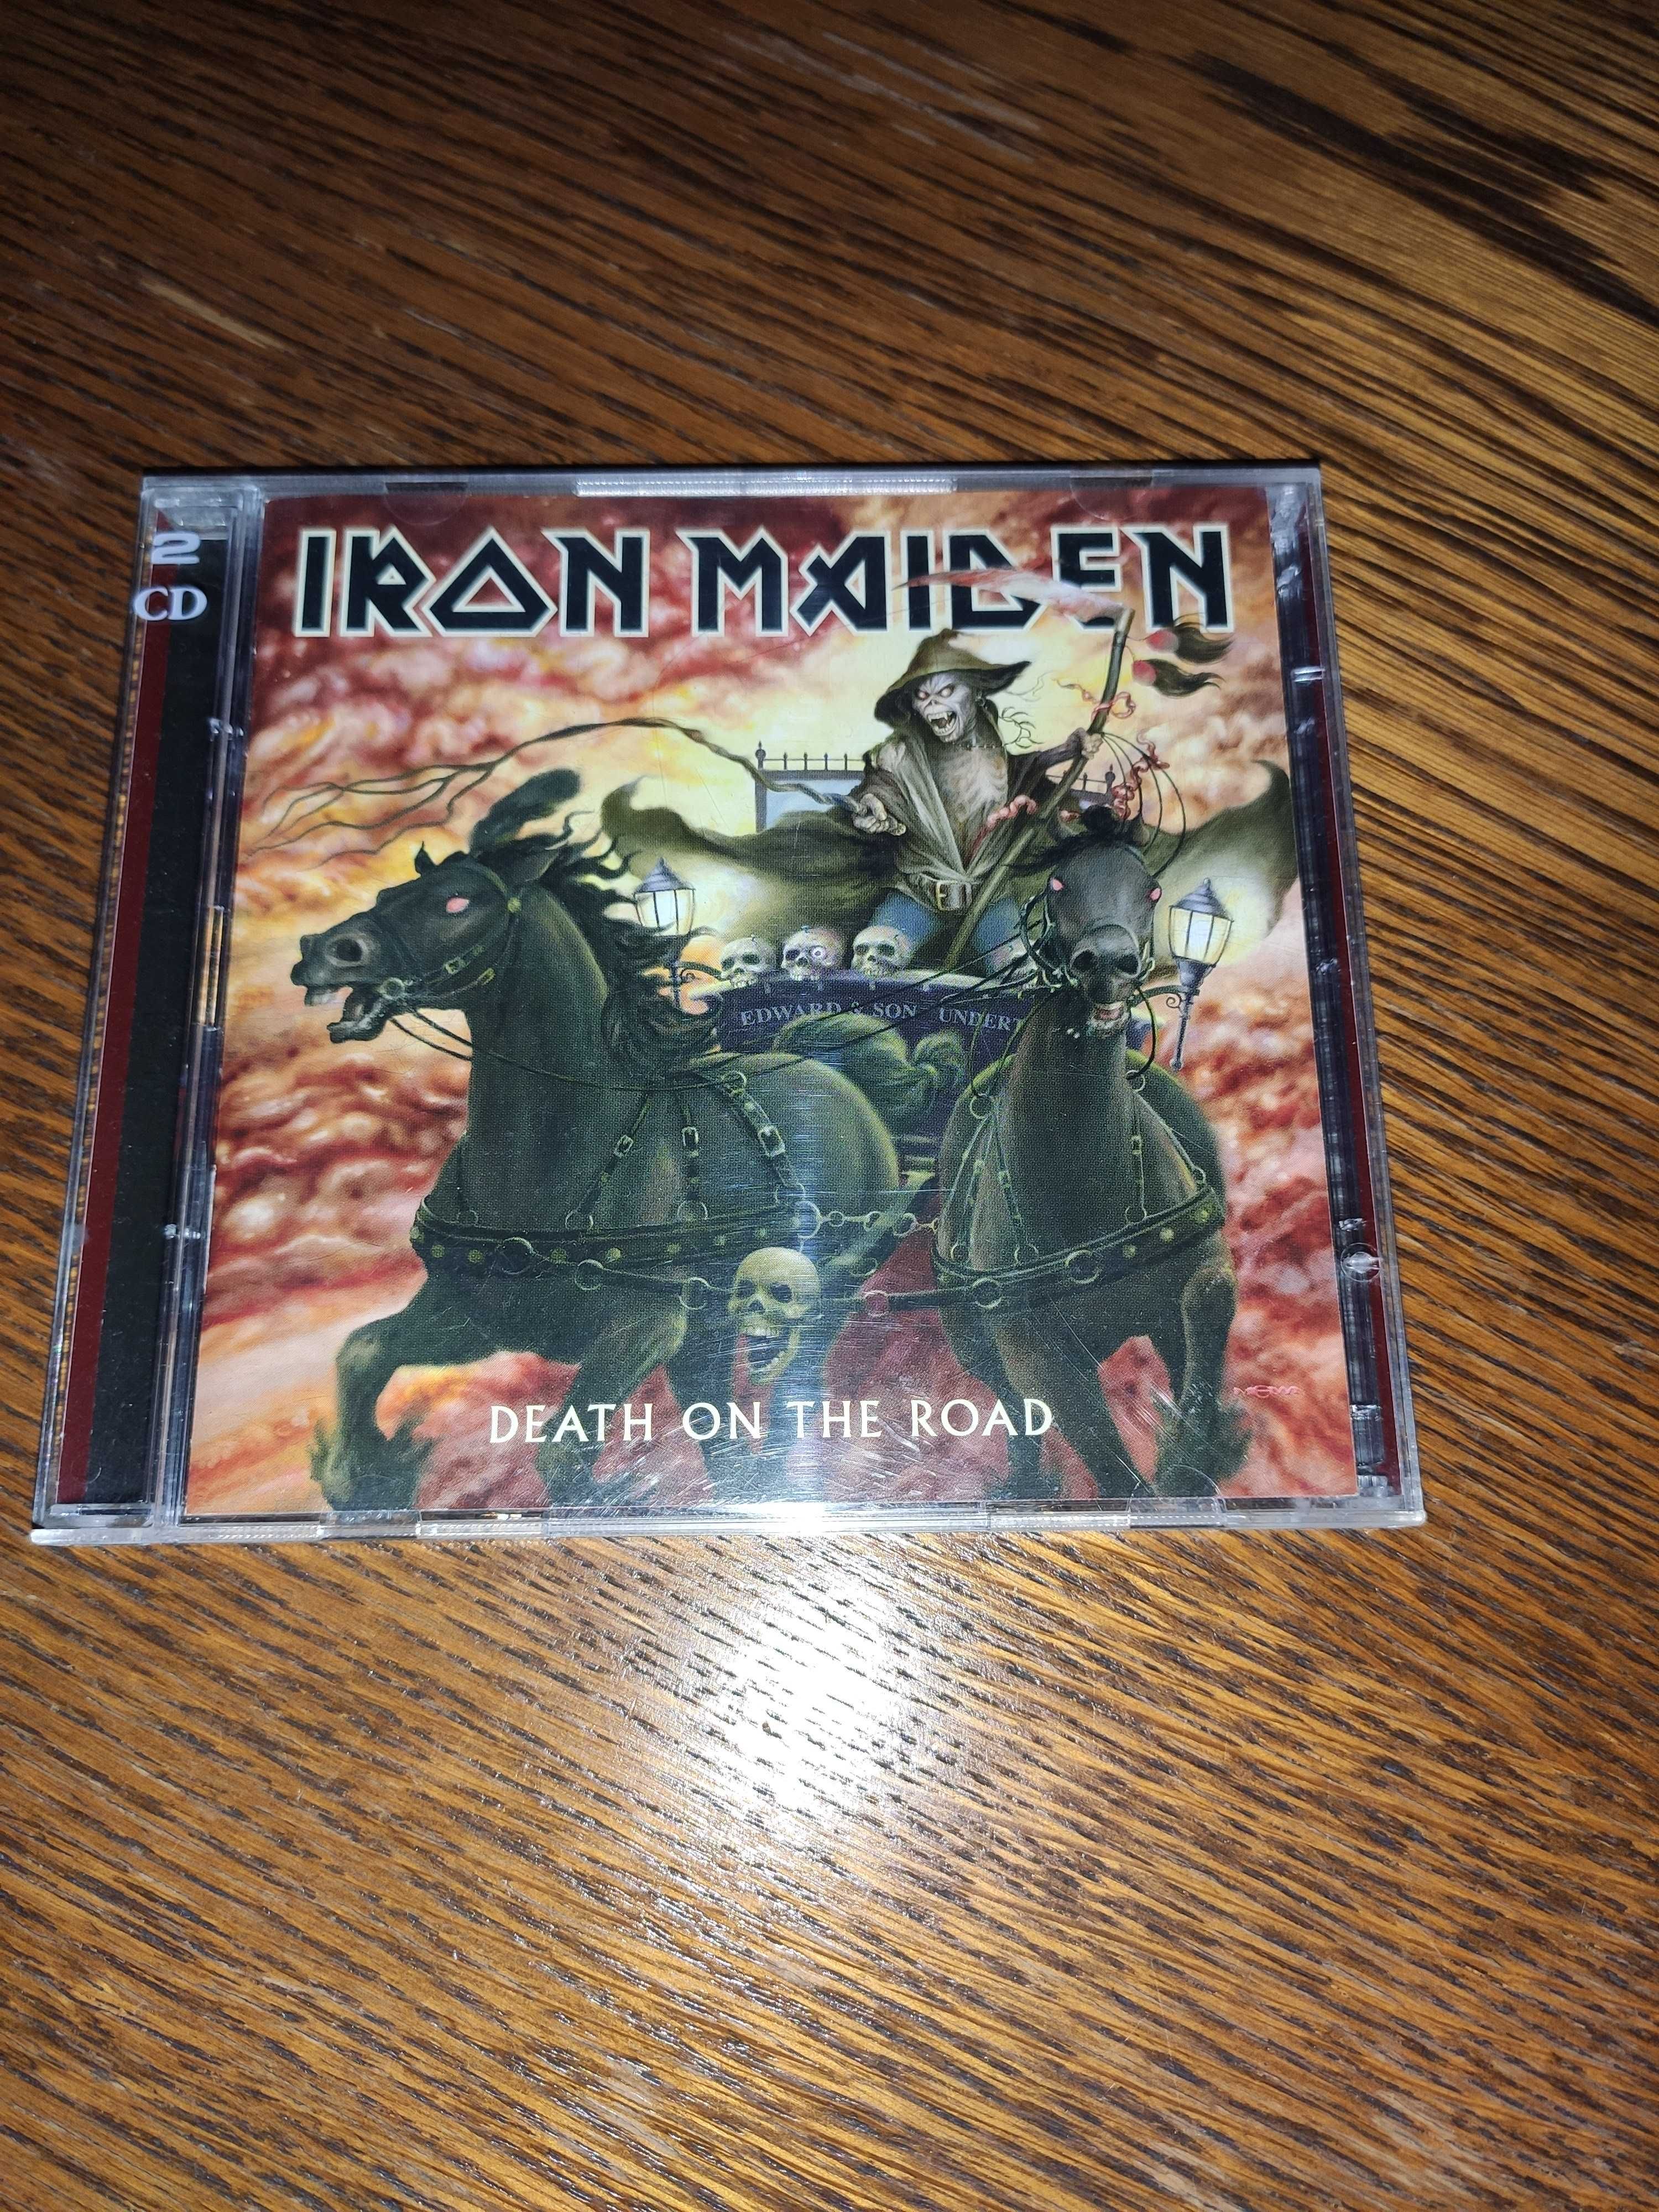 Iron Maiden - Death on the road, 2CD 2010, Parlophone